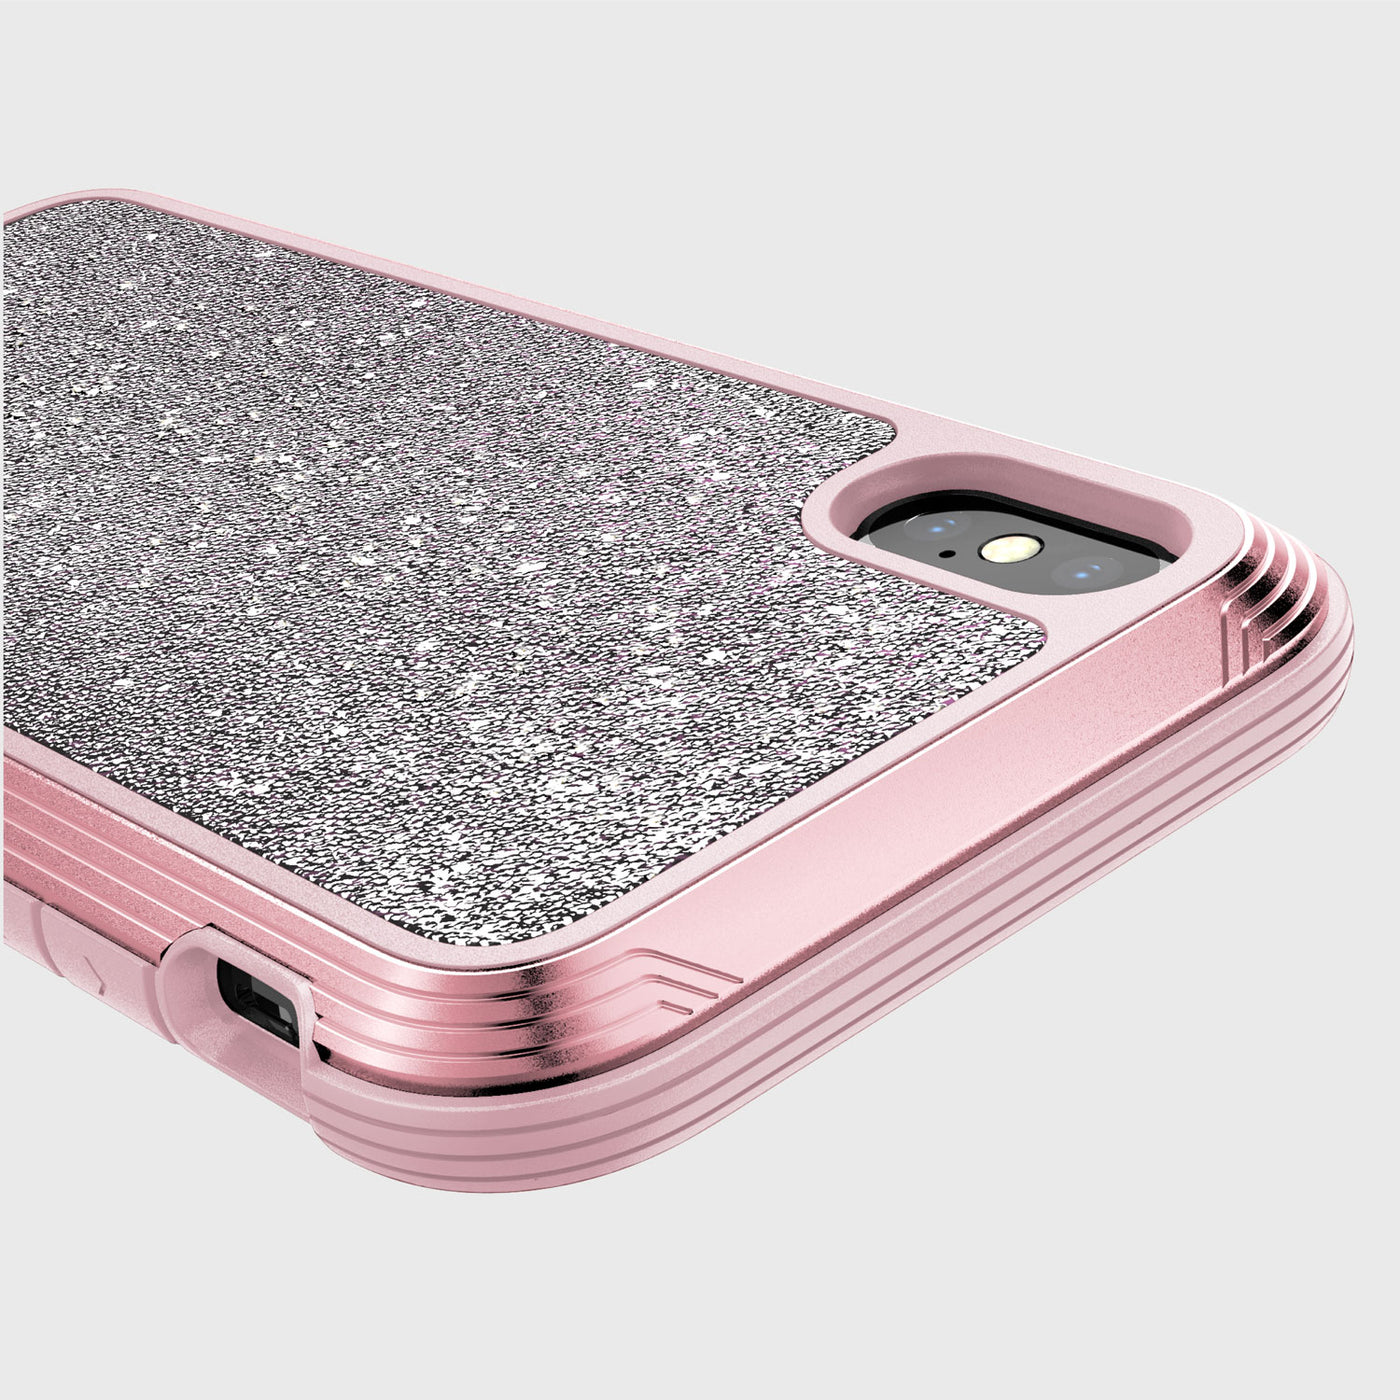 Luxurious Case for iPhone X. Raptic Lux in pink glitter.